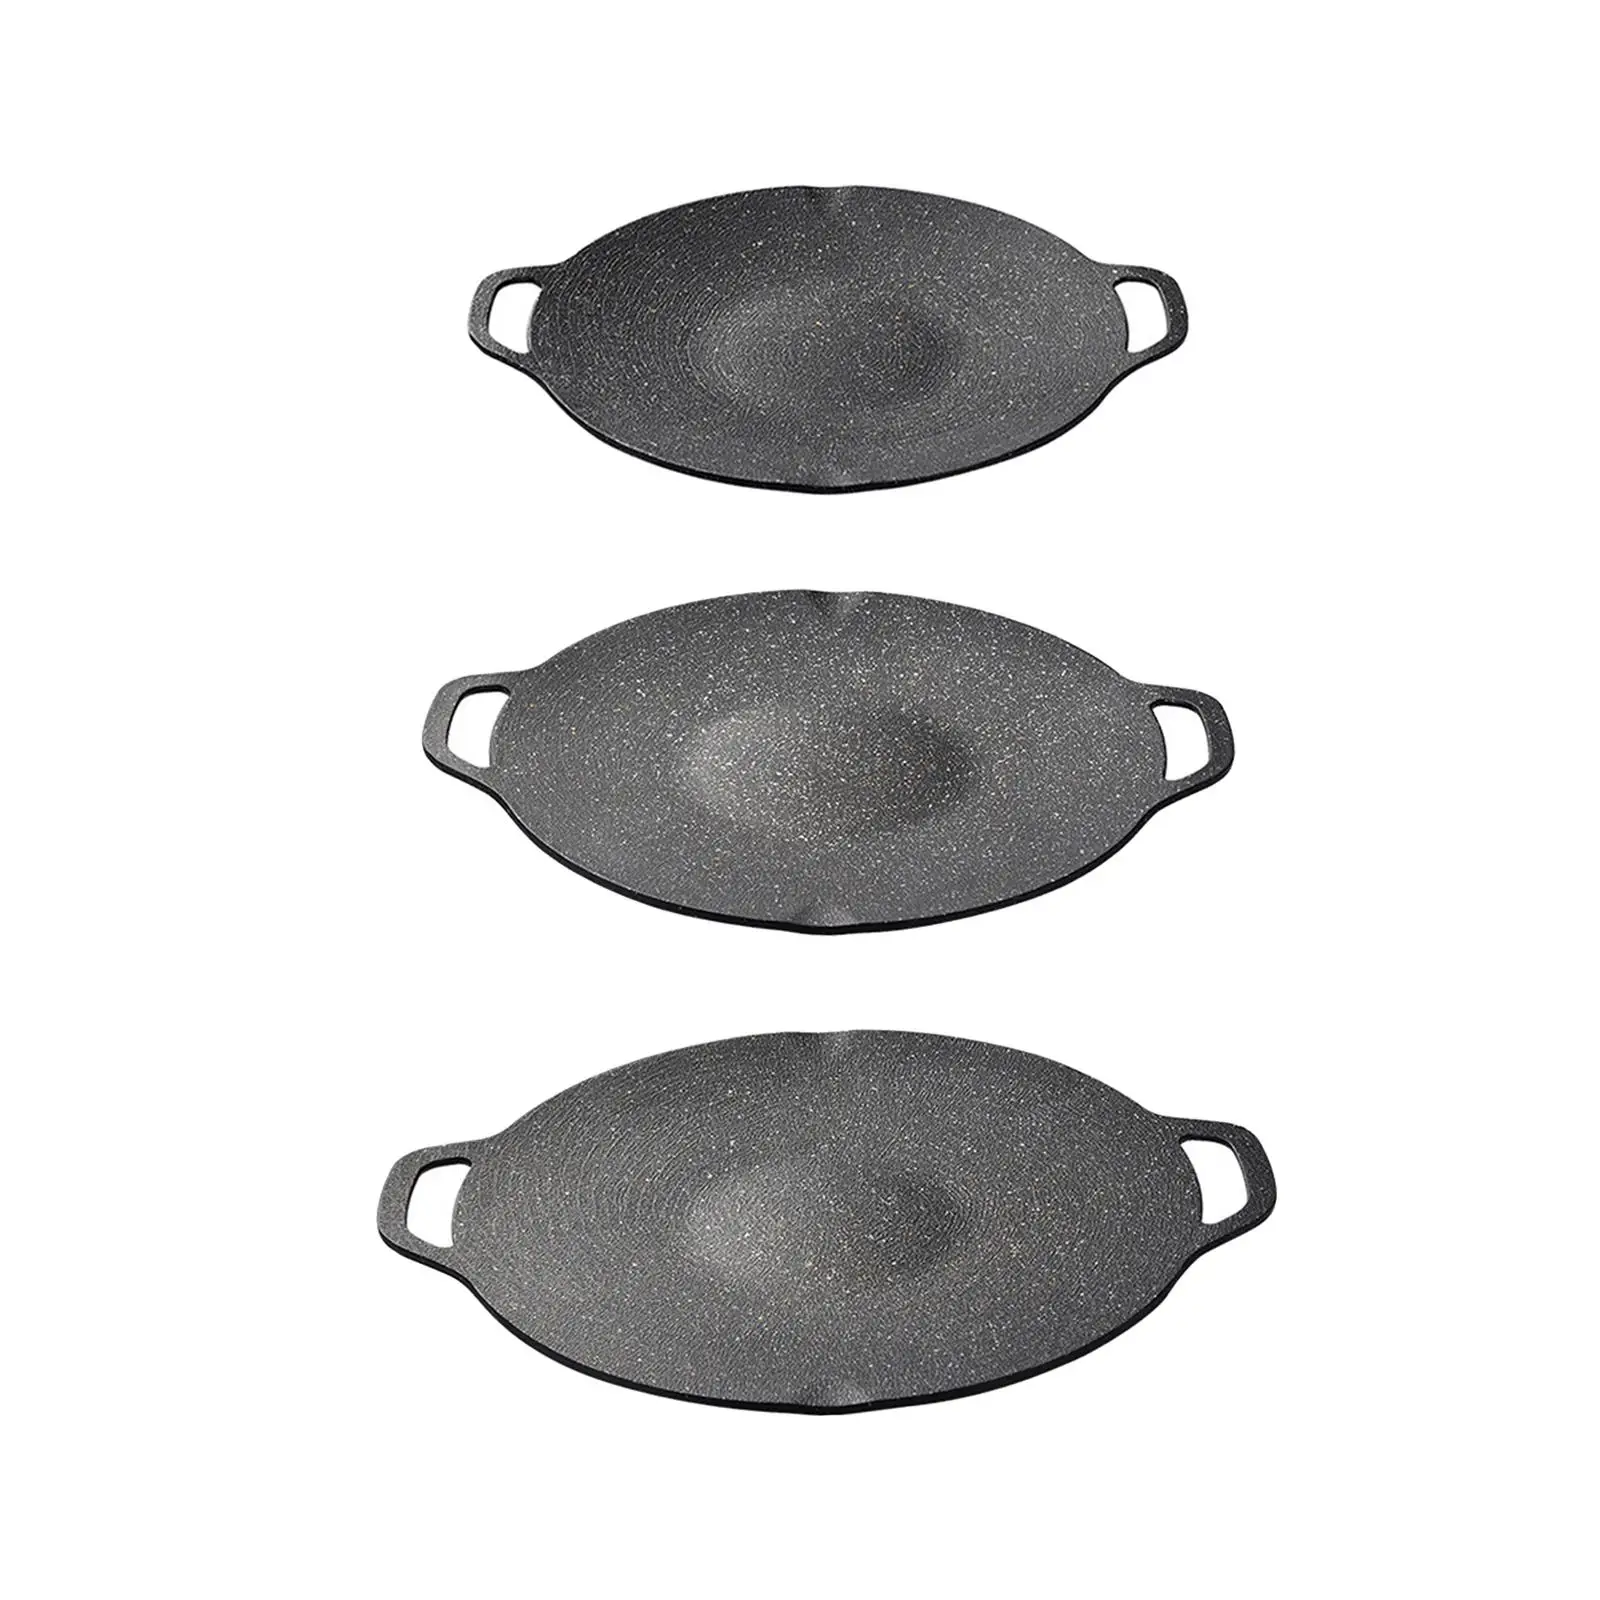 Korean Bbq Pan for Camping and Outdoor Cookware with Handles Griddle Pan